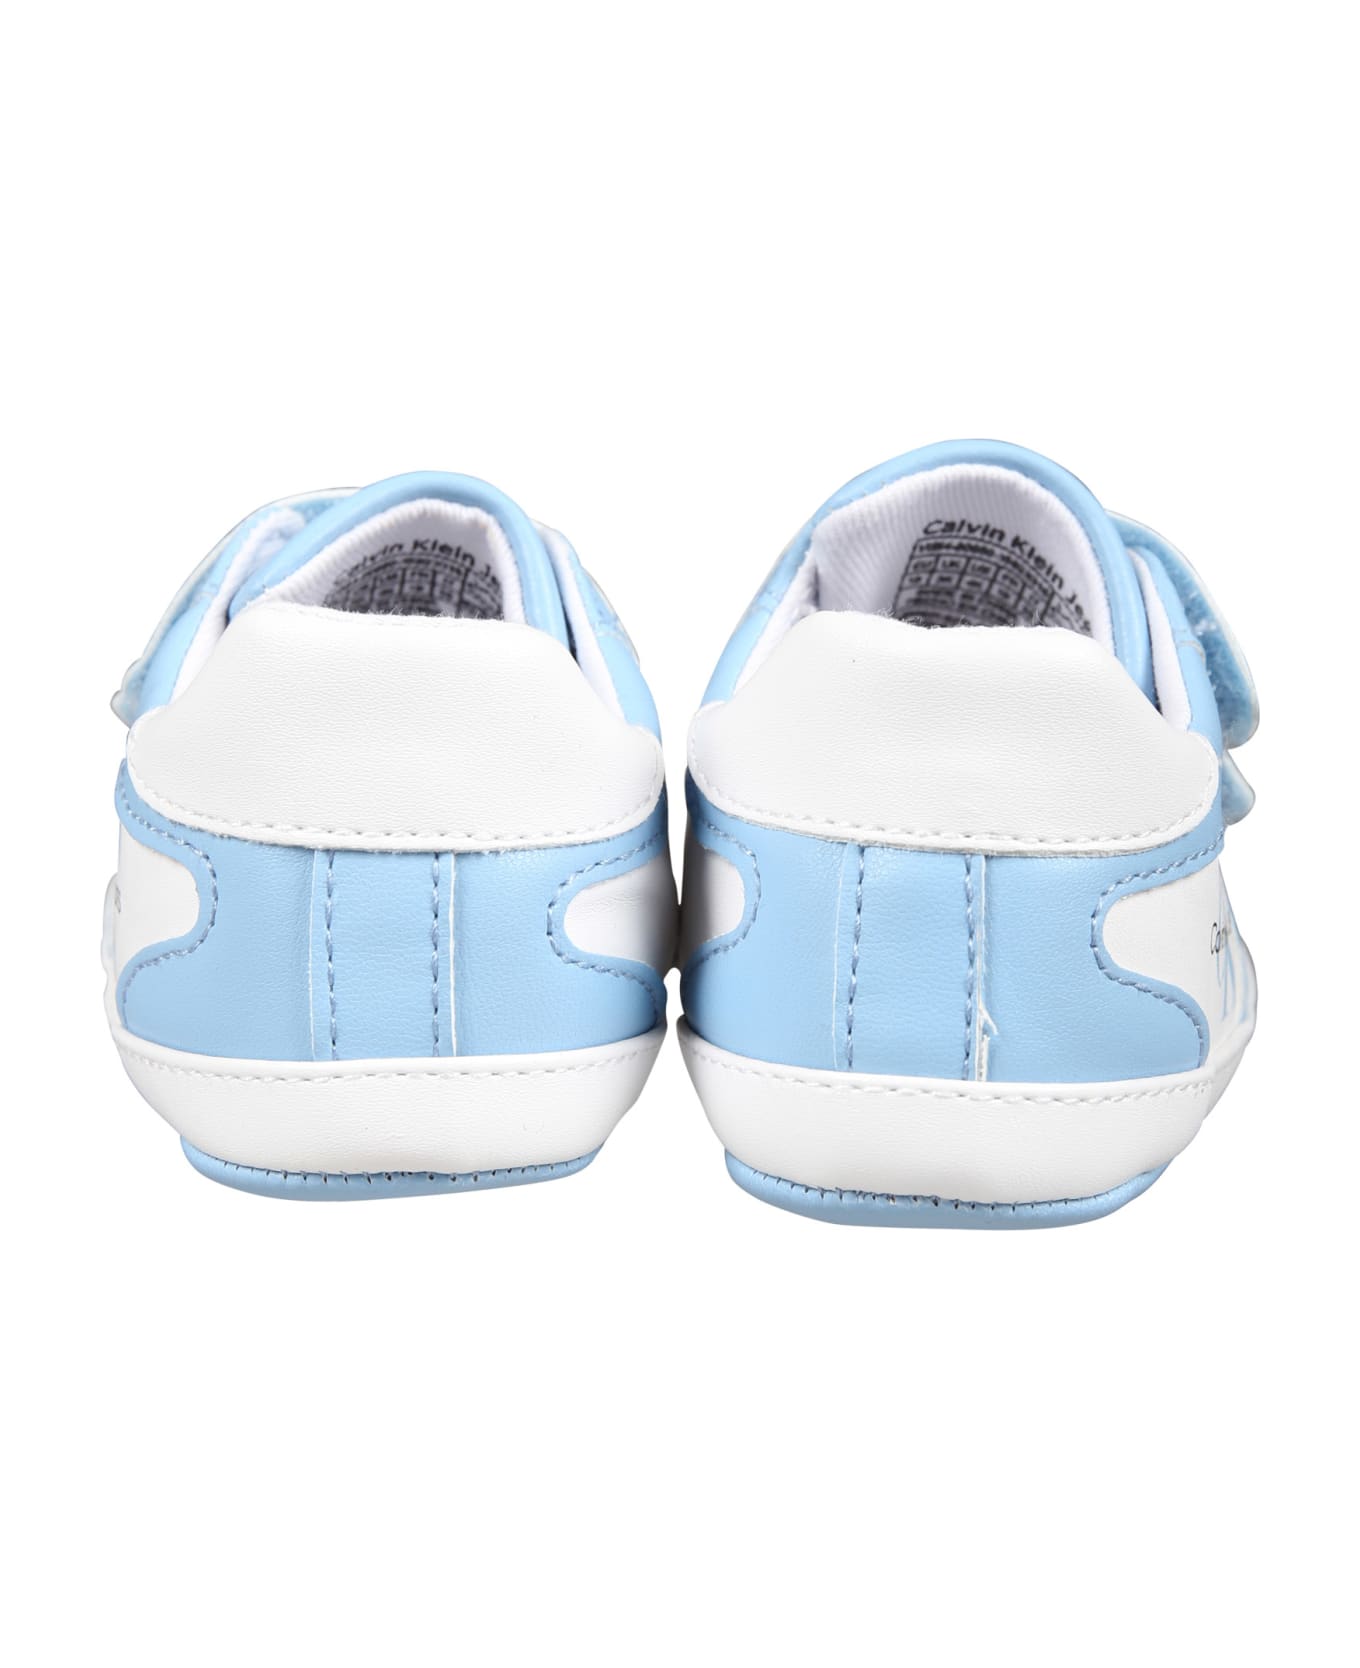 Calvin Klein Light Blue Sneakers For Baby Boy With Logo - Light Blue